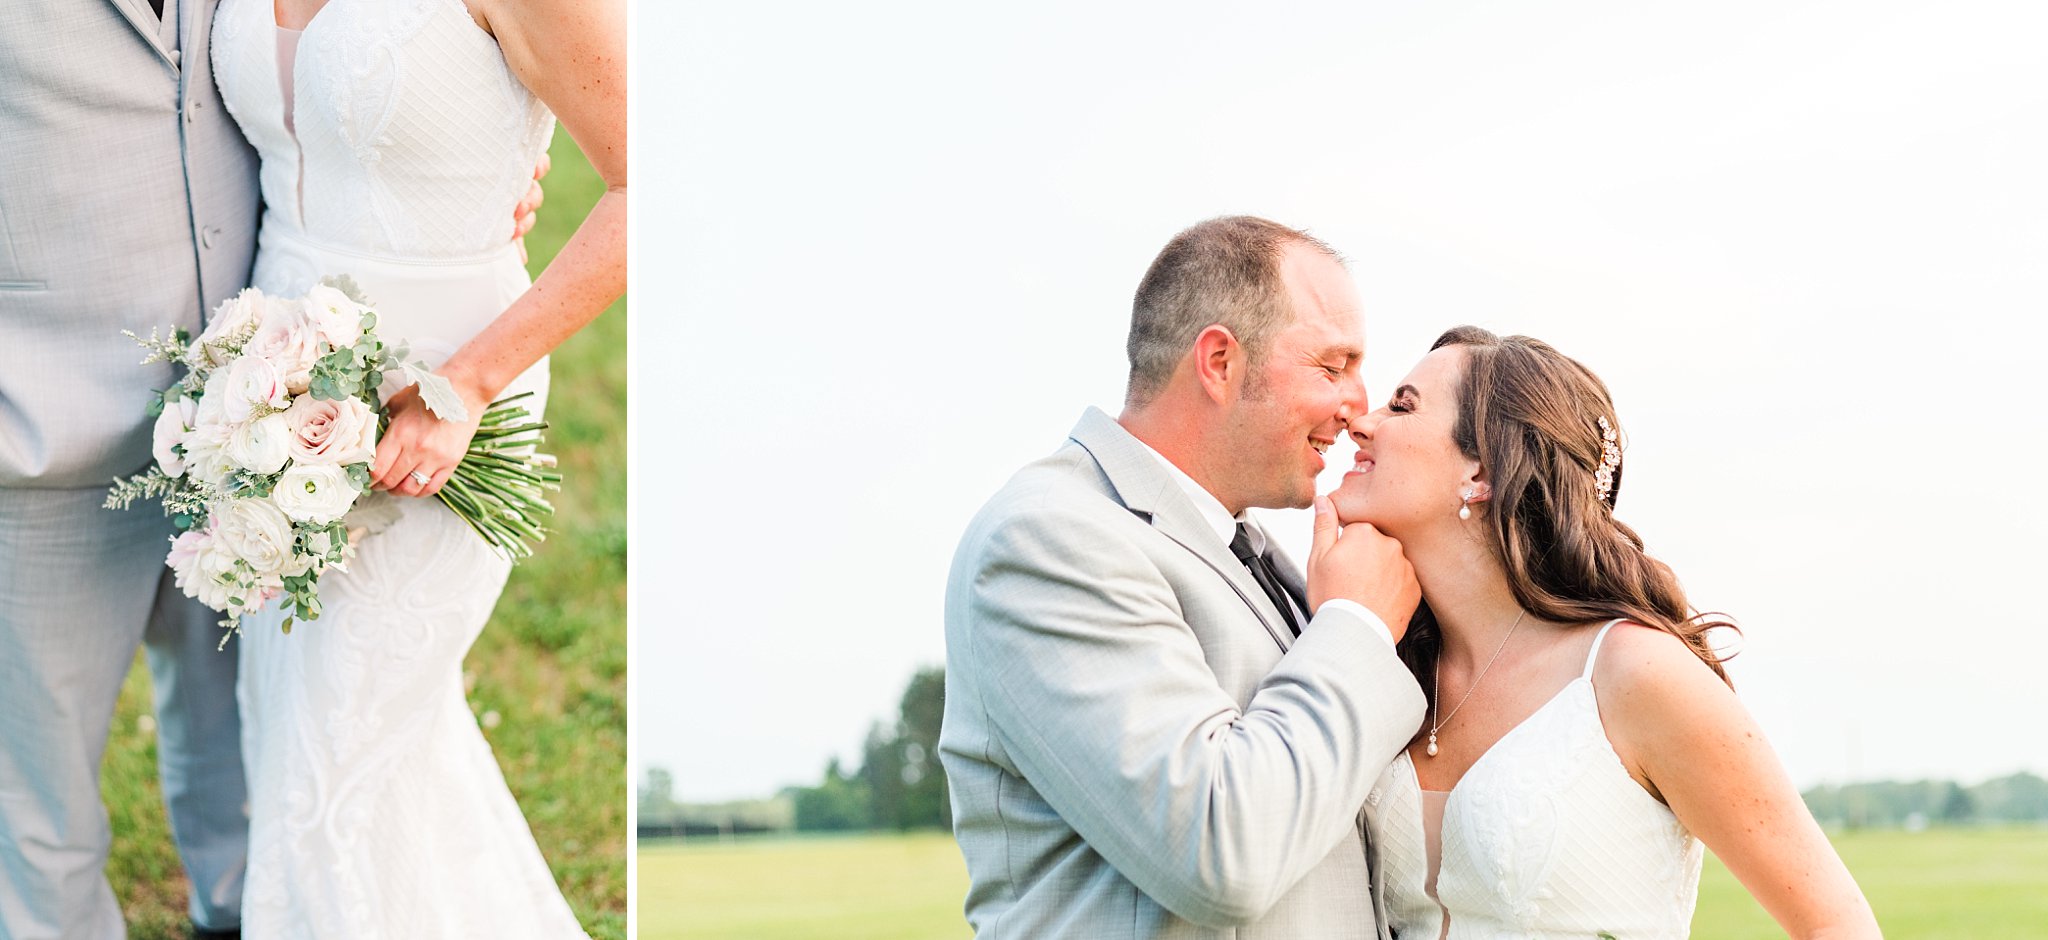 a groom gently grabs a bride's chin and pulls her in for a kiss